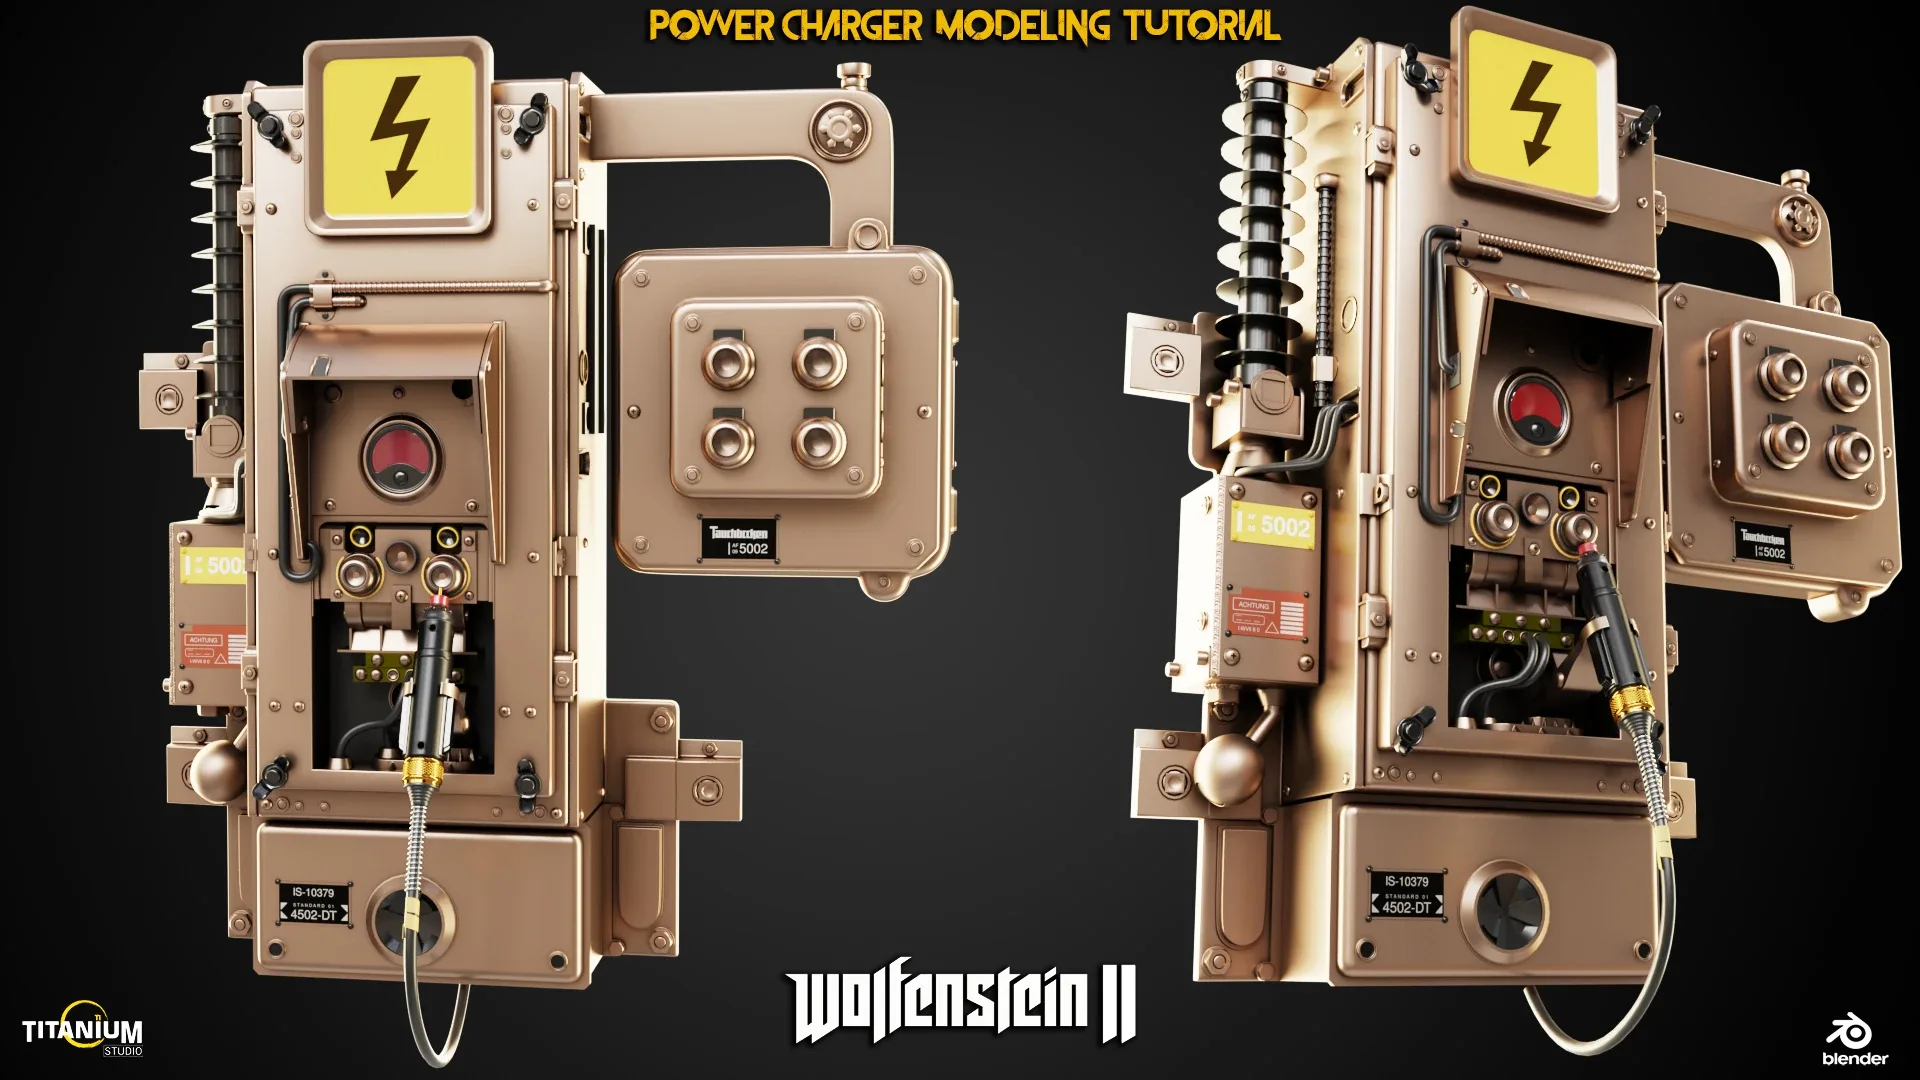 Modeling Optimized Sci-fi Power Charger Machine in Blender